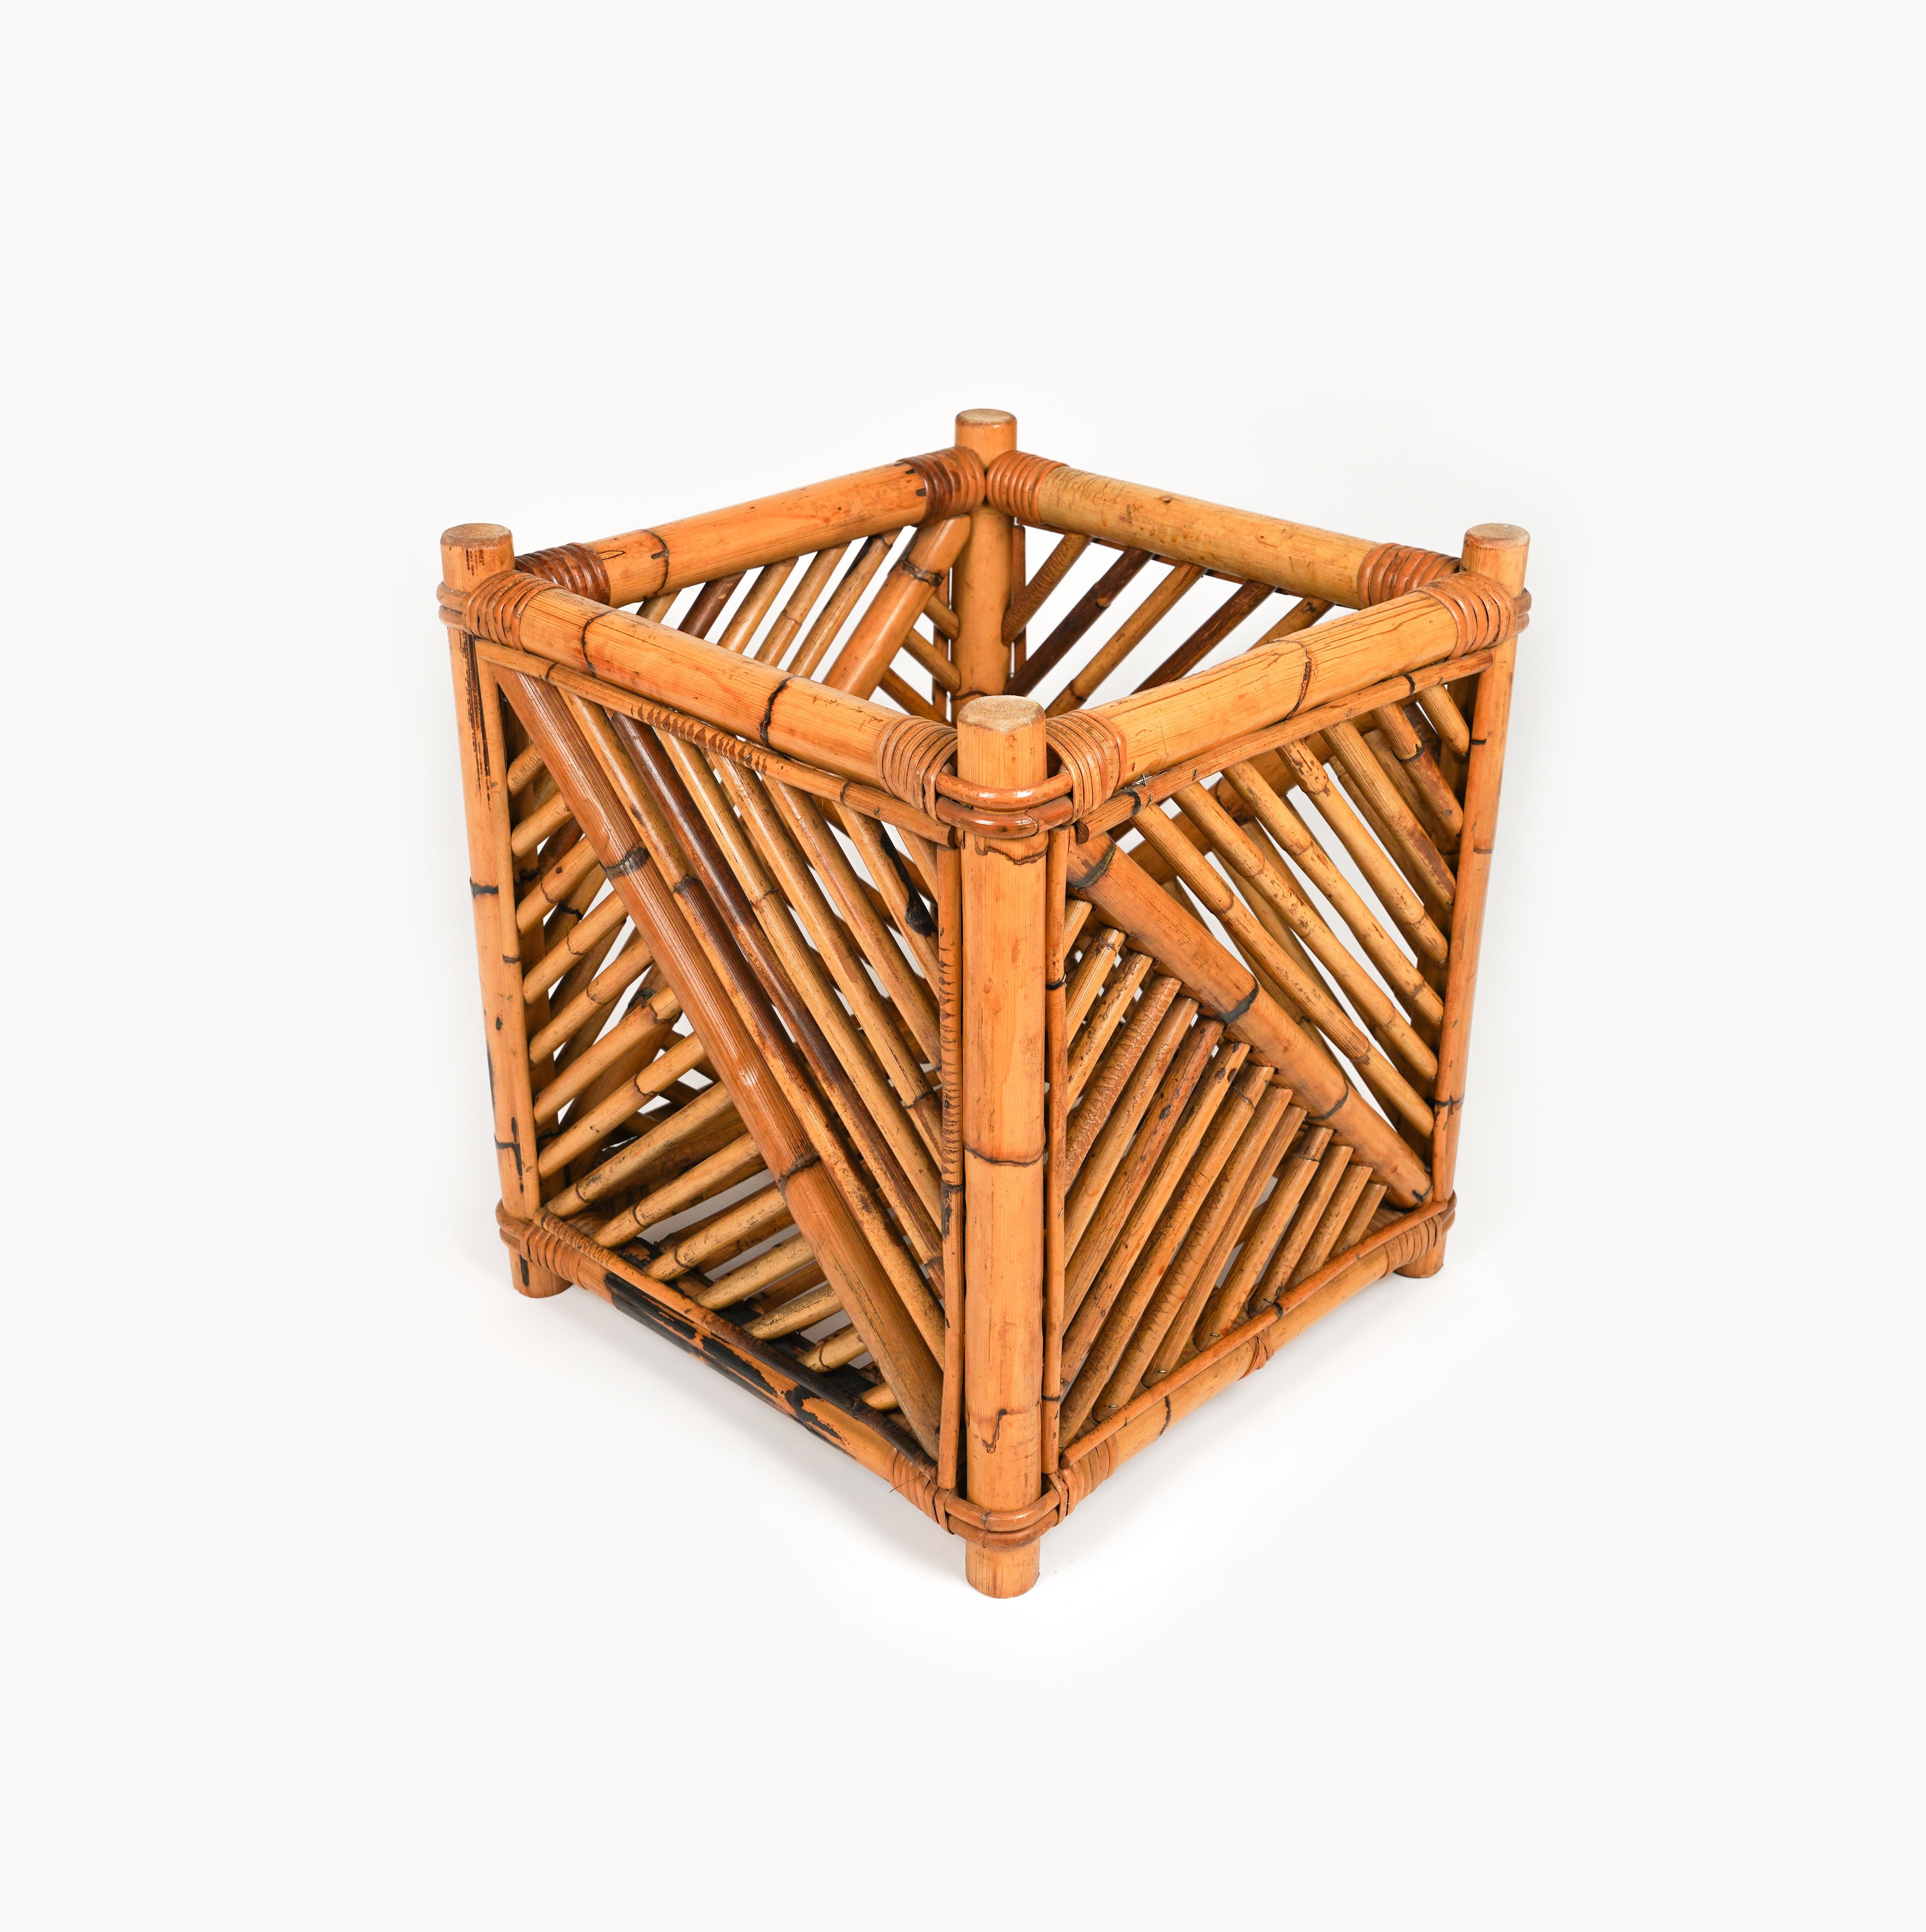 Midcentury squared Plant Holder or Basket in rattan and bamboo by Vivai Del Sud.

Made in Italy in the 1970s.

Vivai del sud, Gabriella Crespi and Arpex were the three leading design studios in 1970s Italy specialized in this high-end tropical glam